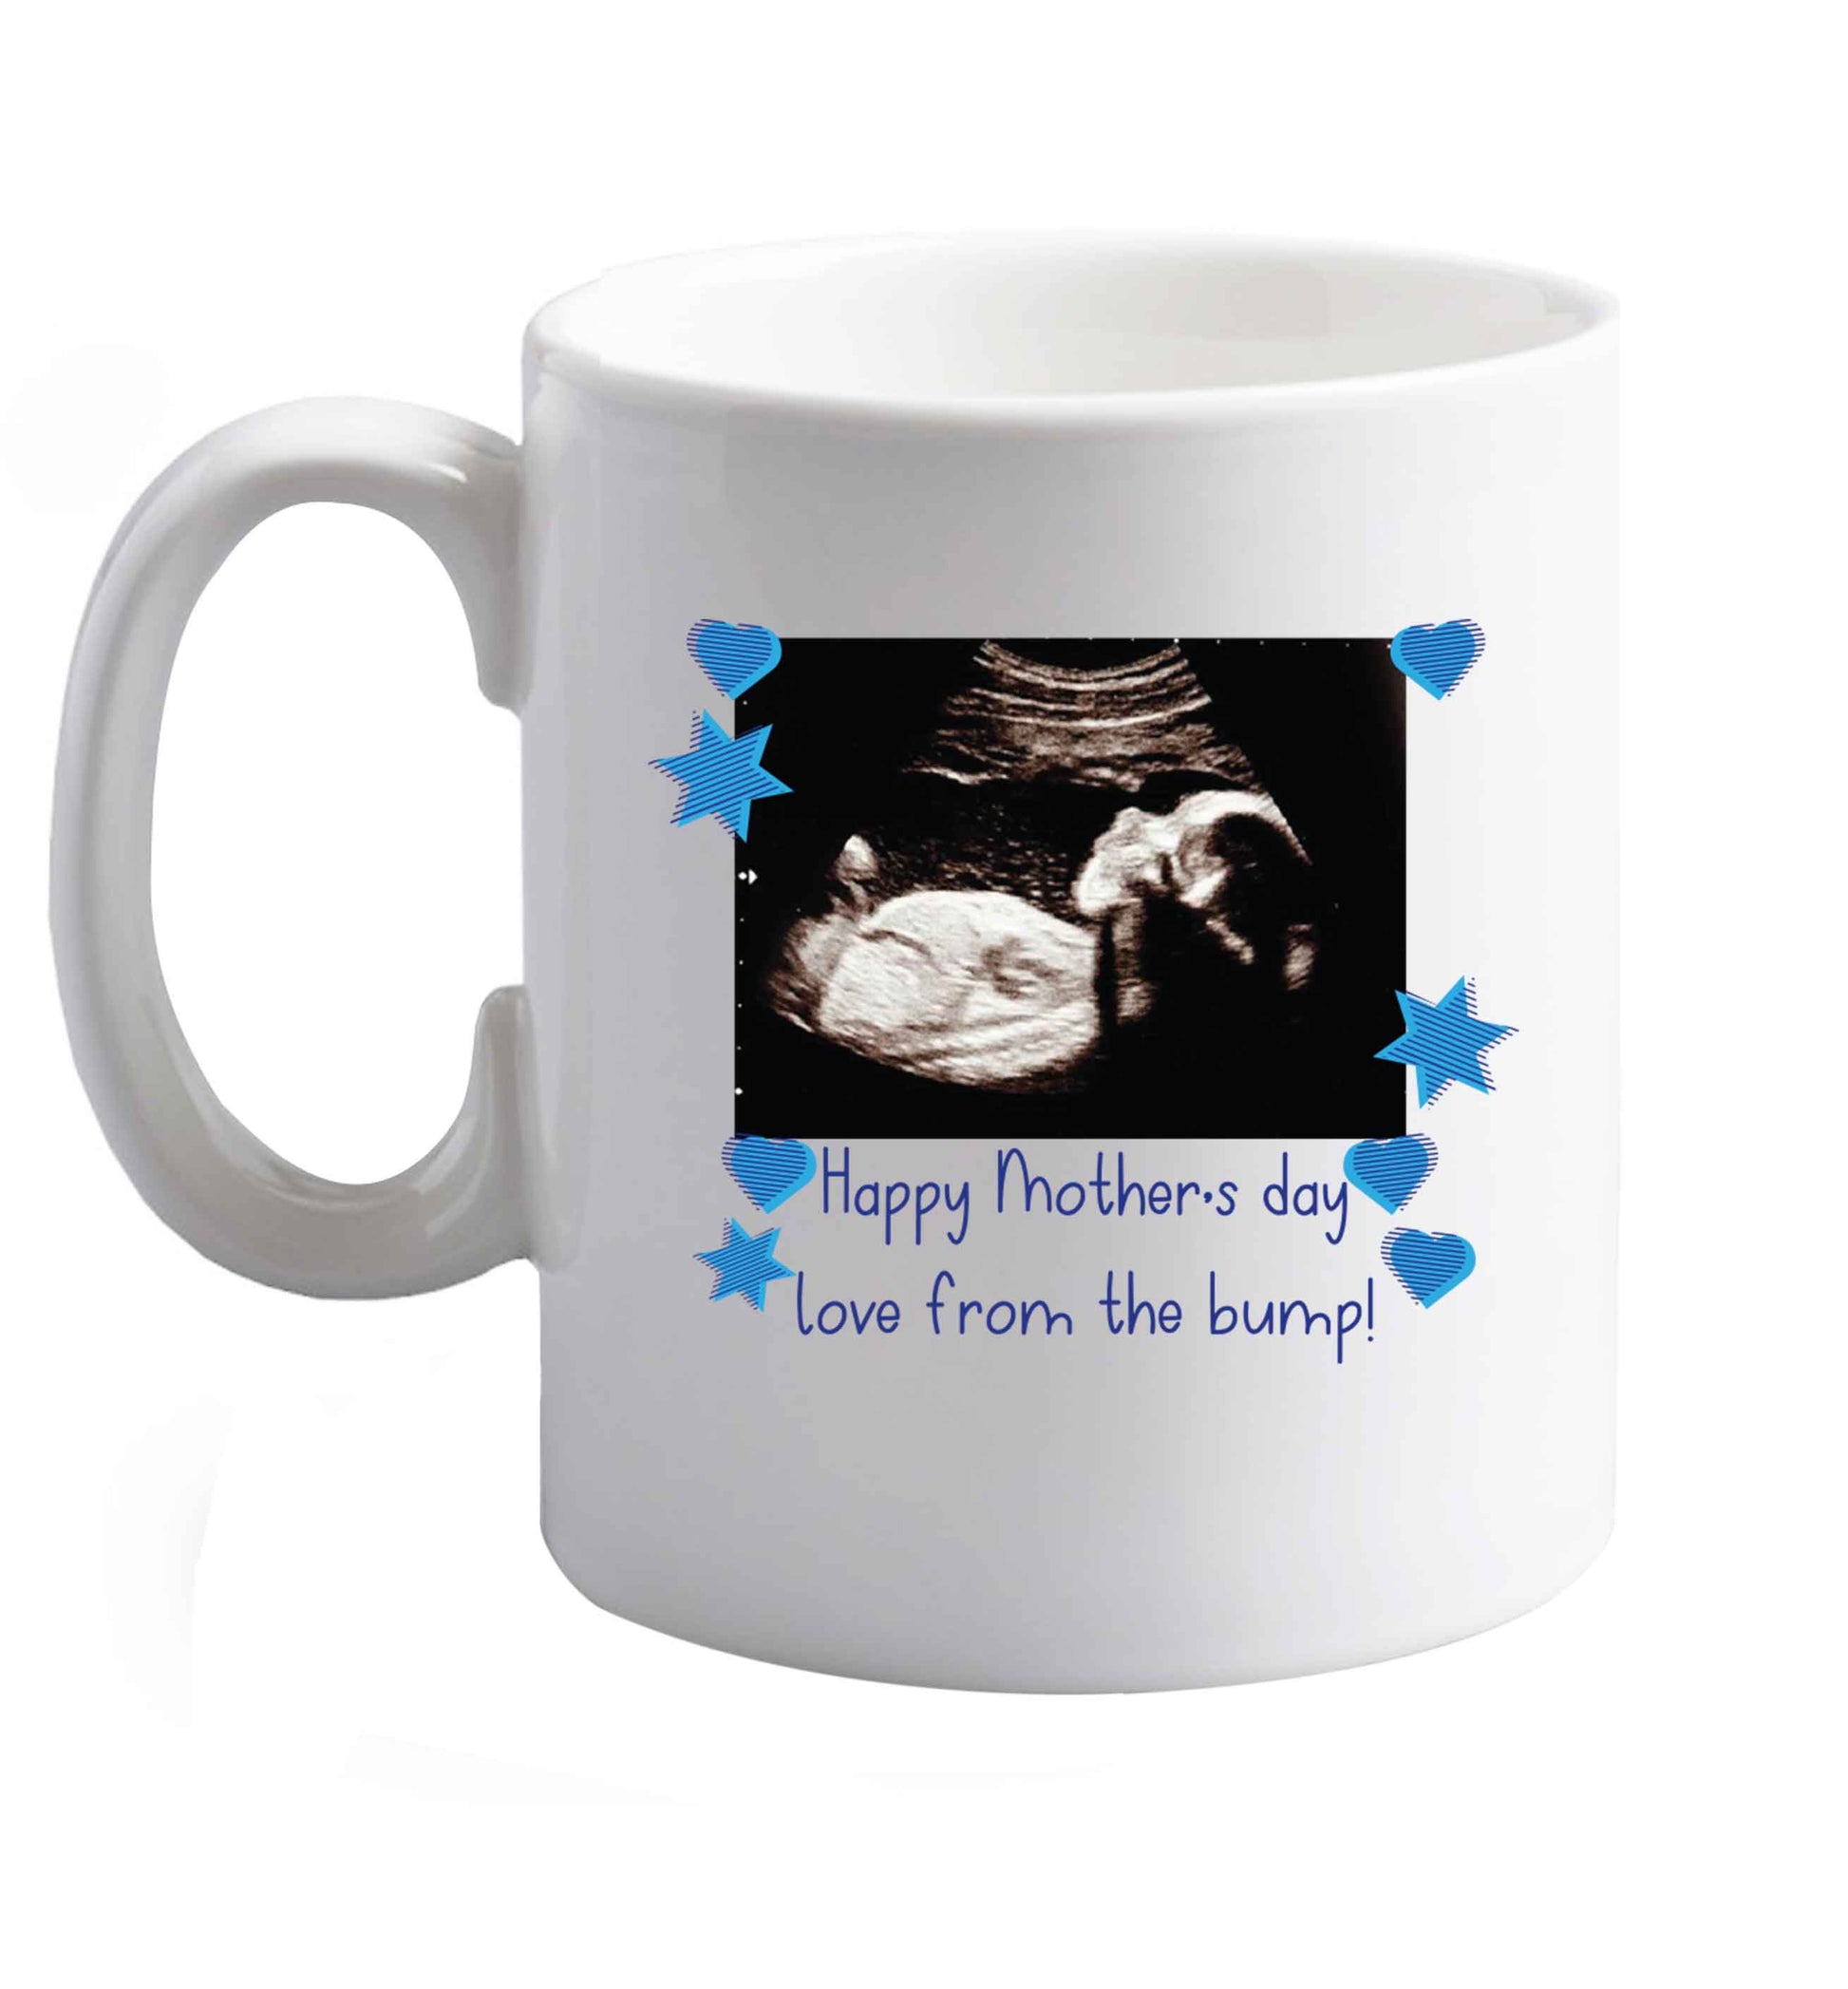 10 oz Happy Mother's day love from the bump - blue ceramic mug right handed